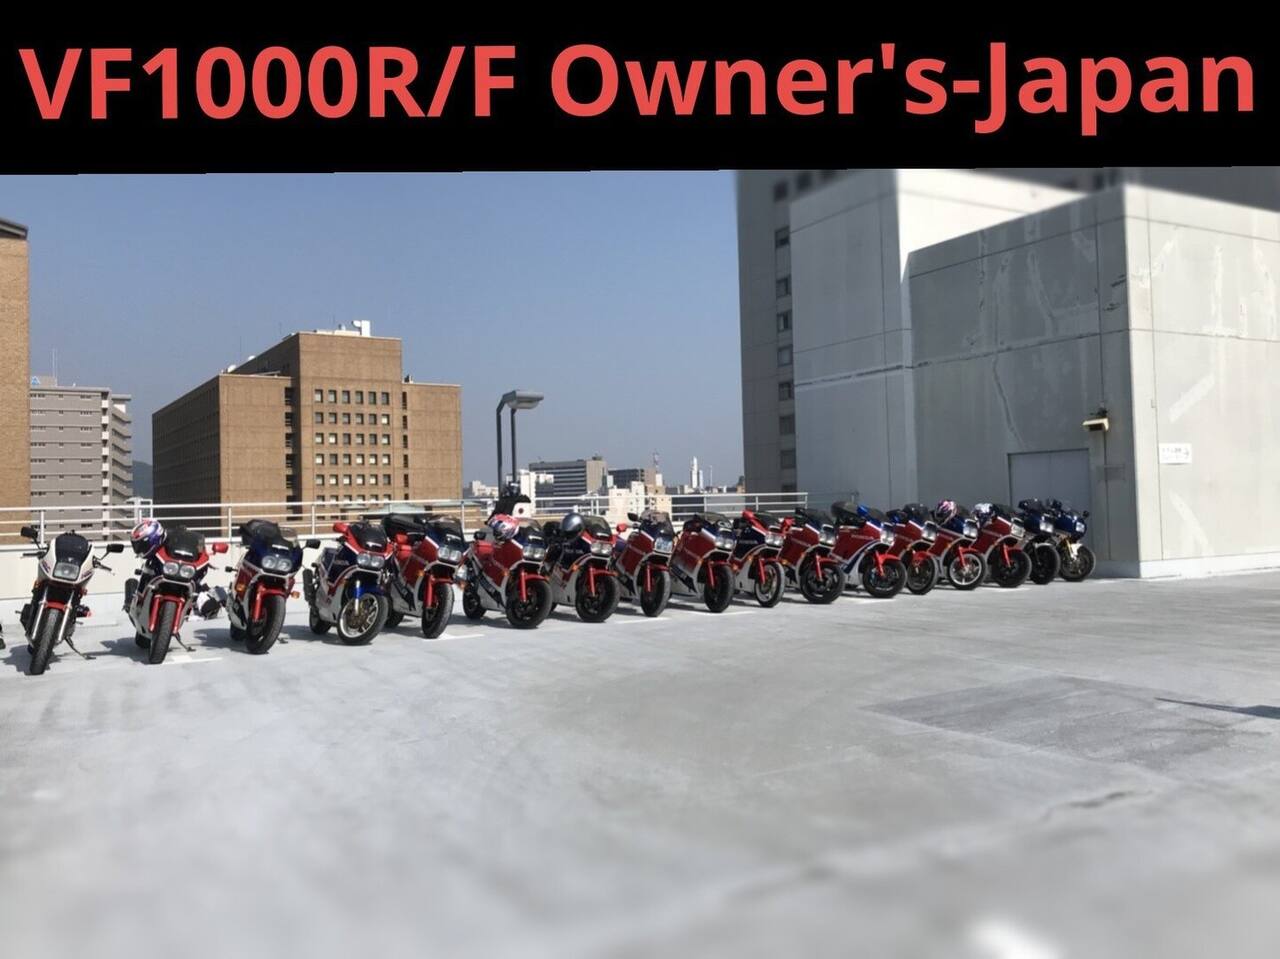 VF1000R/F owners掲示板